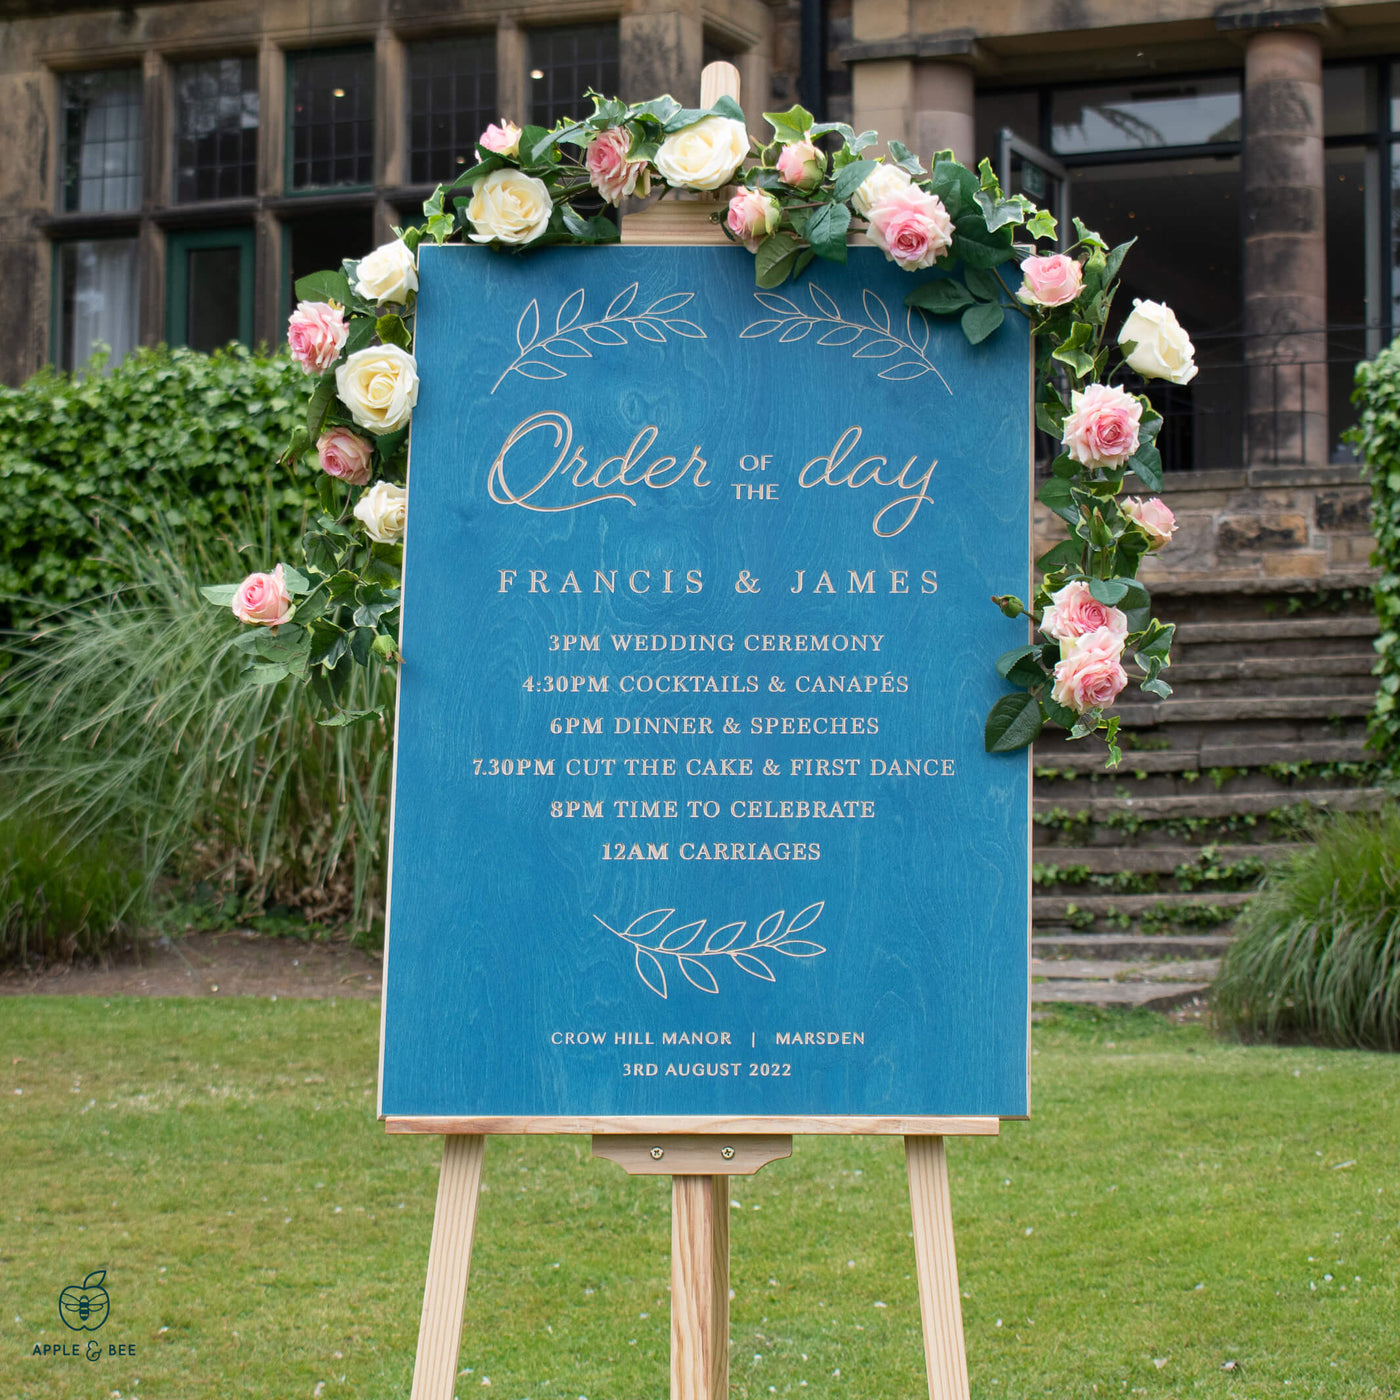 'The Kenwood' Order of the Day Wedding Sign